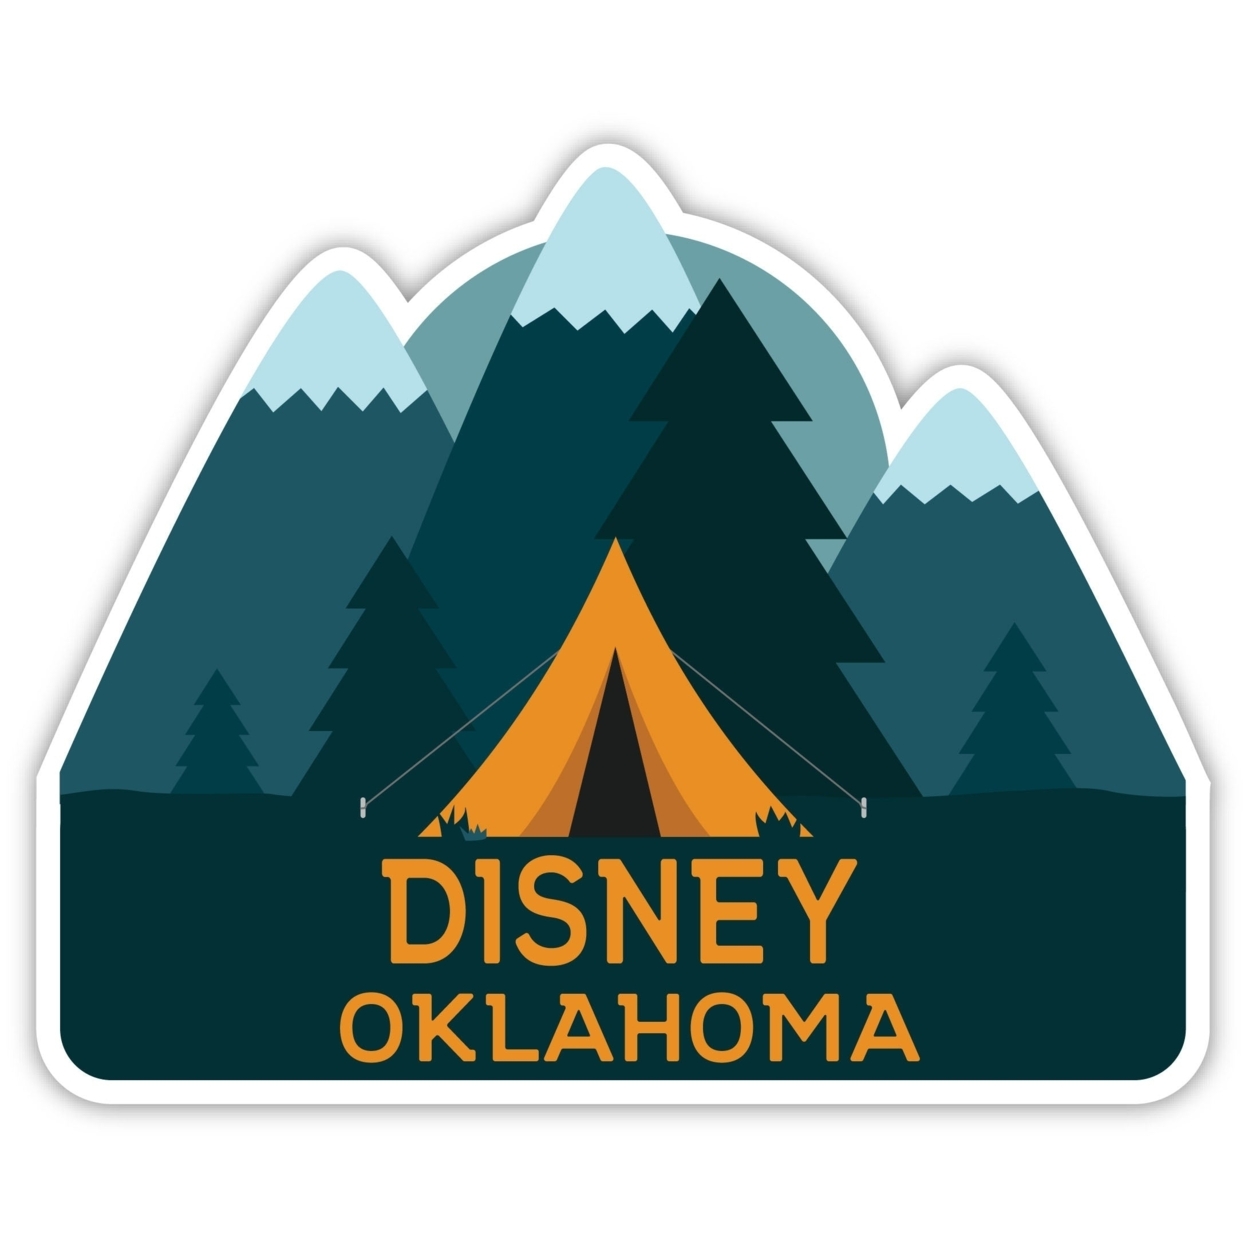 Disney Oklahoma Souvenir Decorative Stickers (Choose Theme And Size) - 4-Pack, 12-Inch, Tent